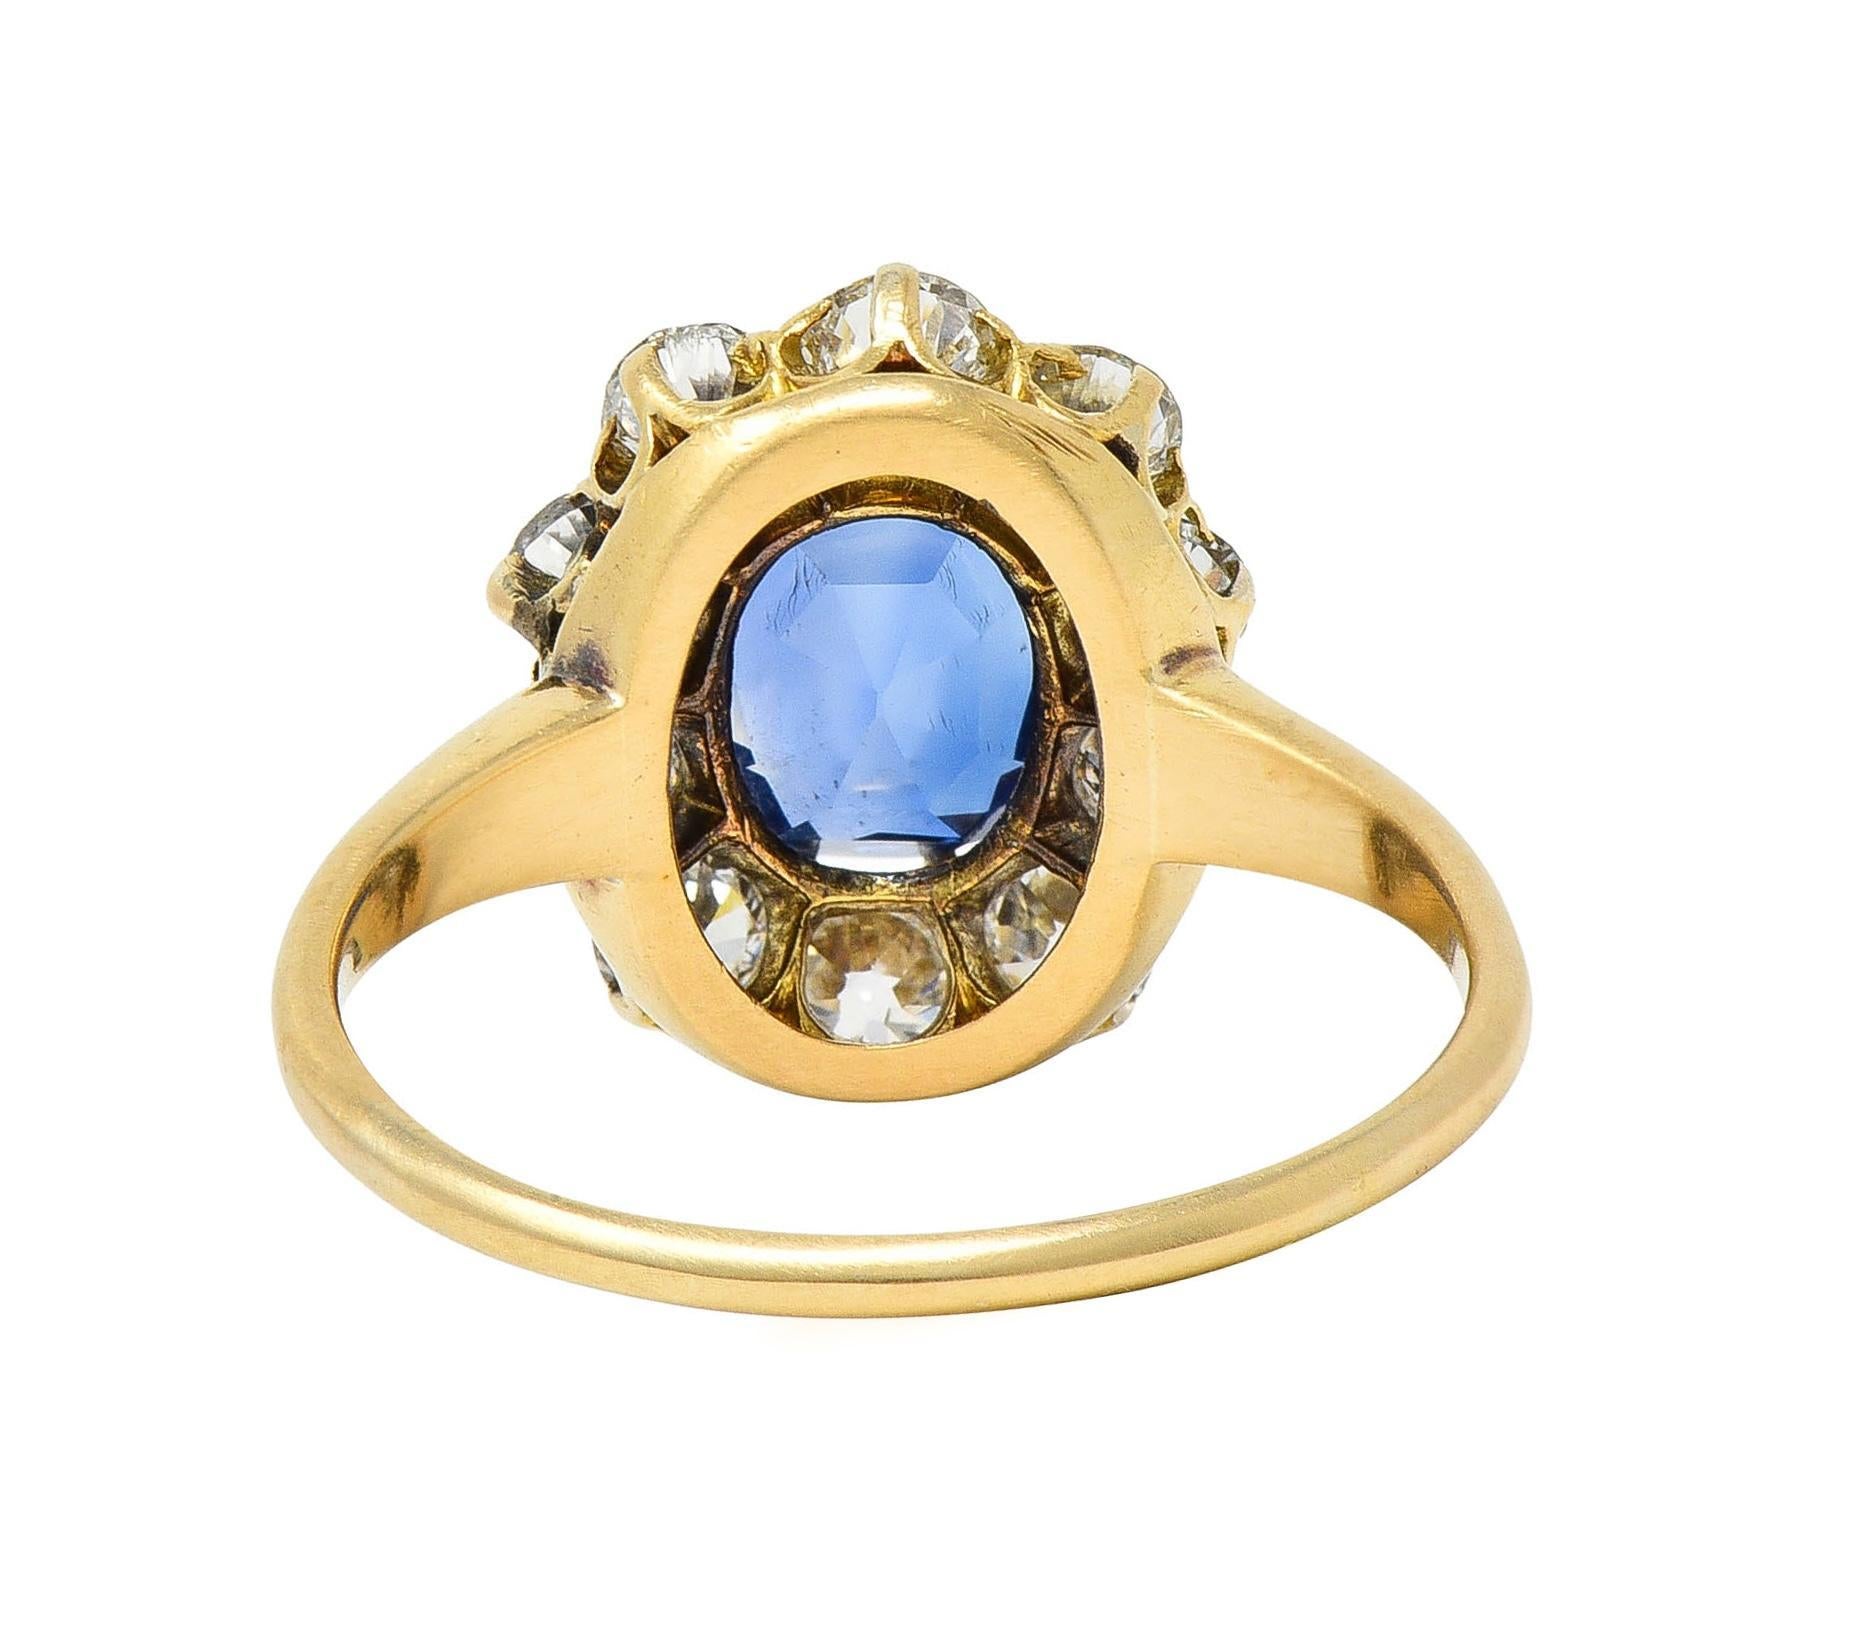 Victorian 2.58 CTW No Heat Kashmir Sapphire Diamond 14 Karat Gold Halo Ring AGL In Excellent Condition For Sale In Philadelphia, PA